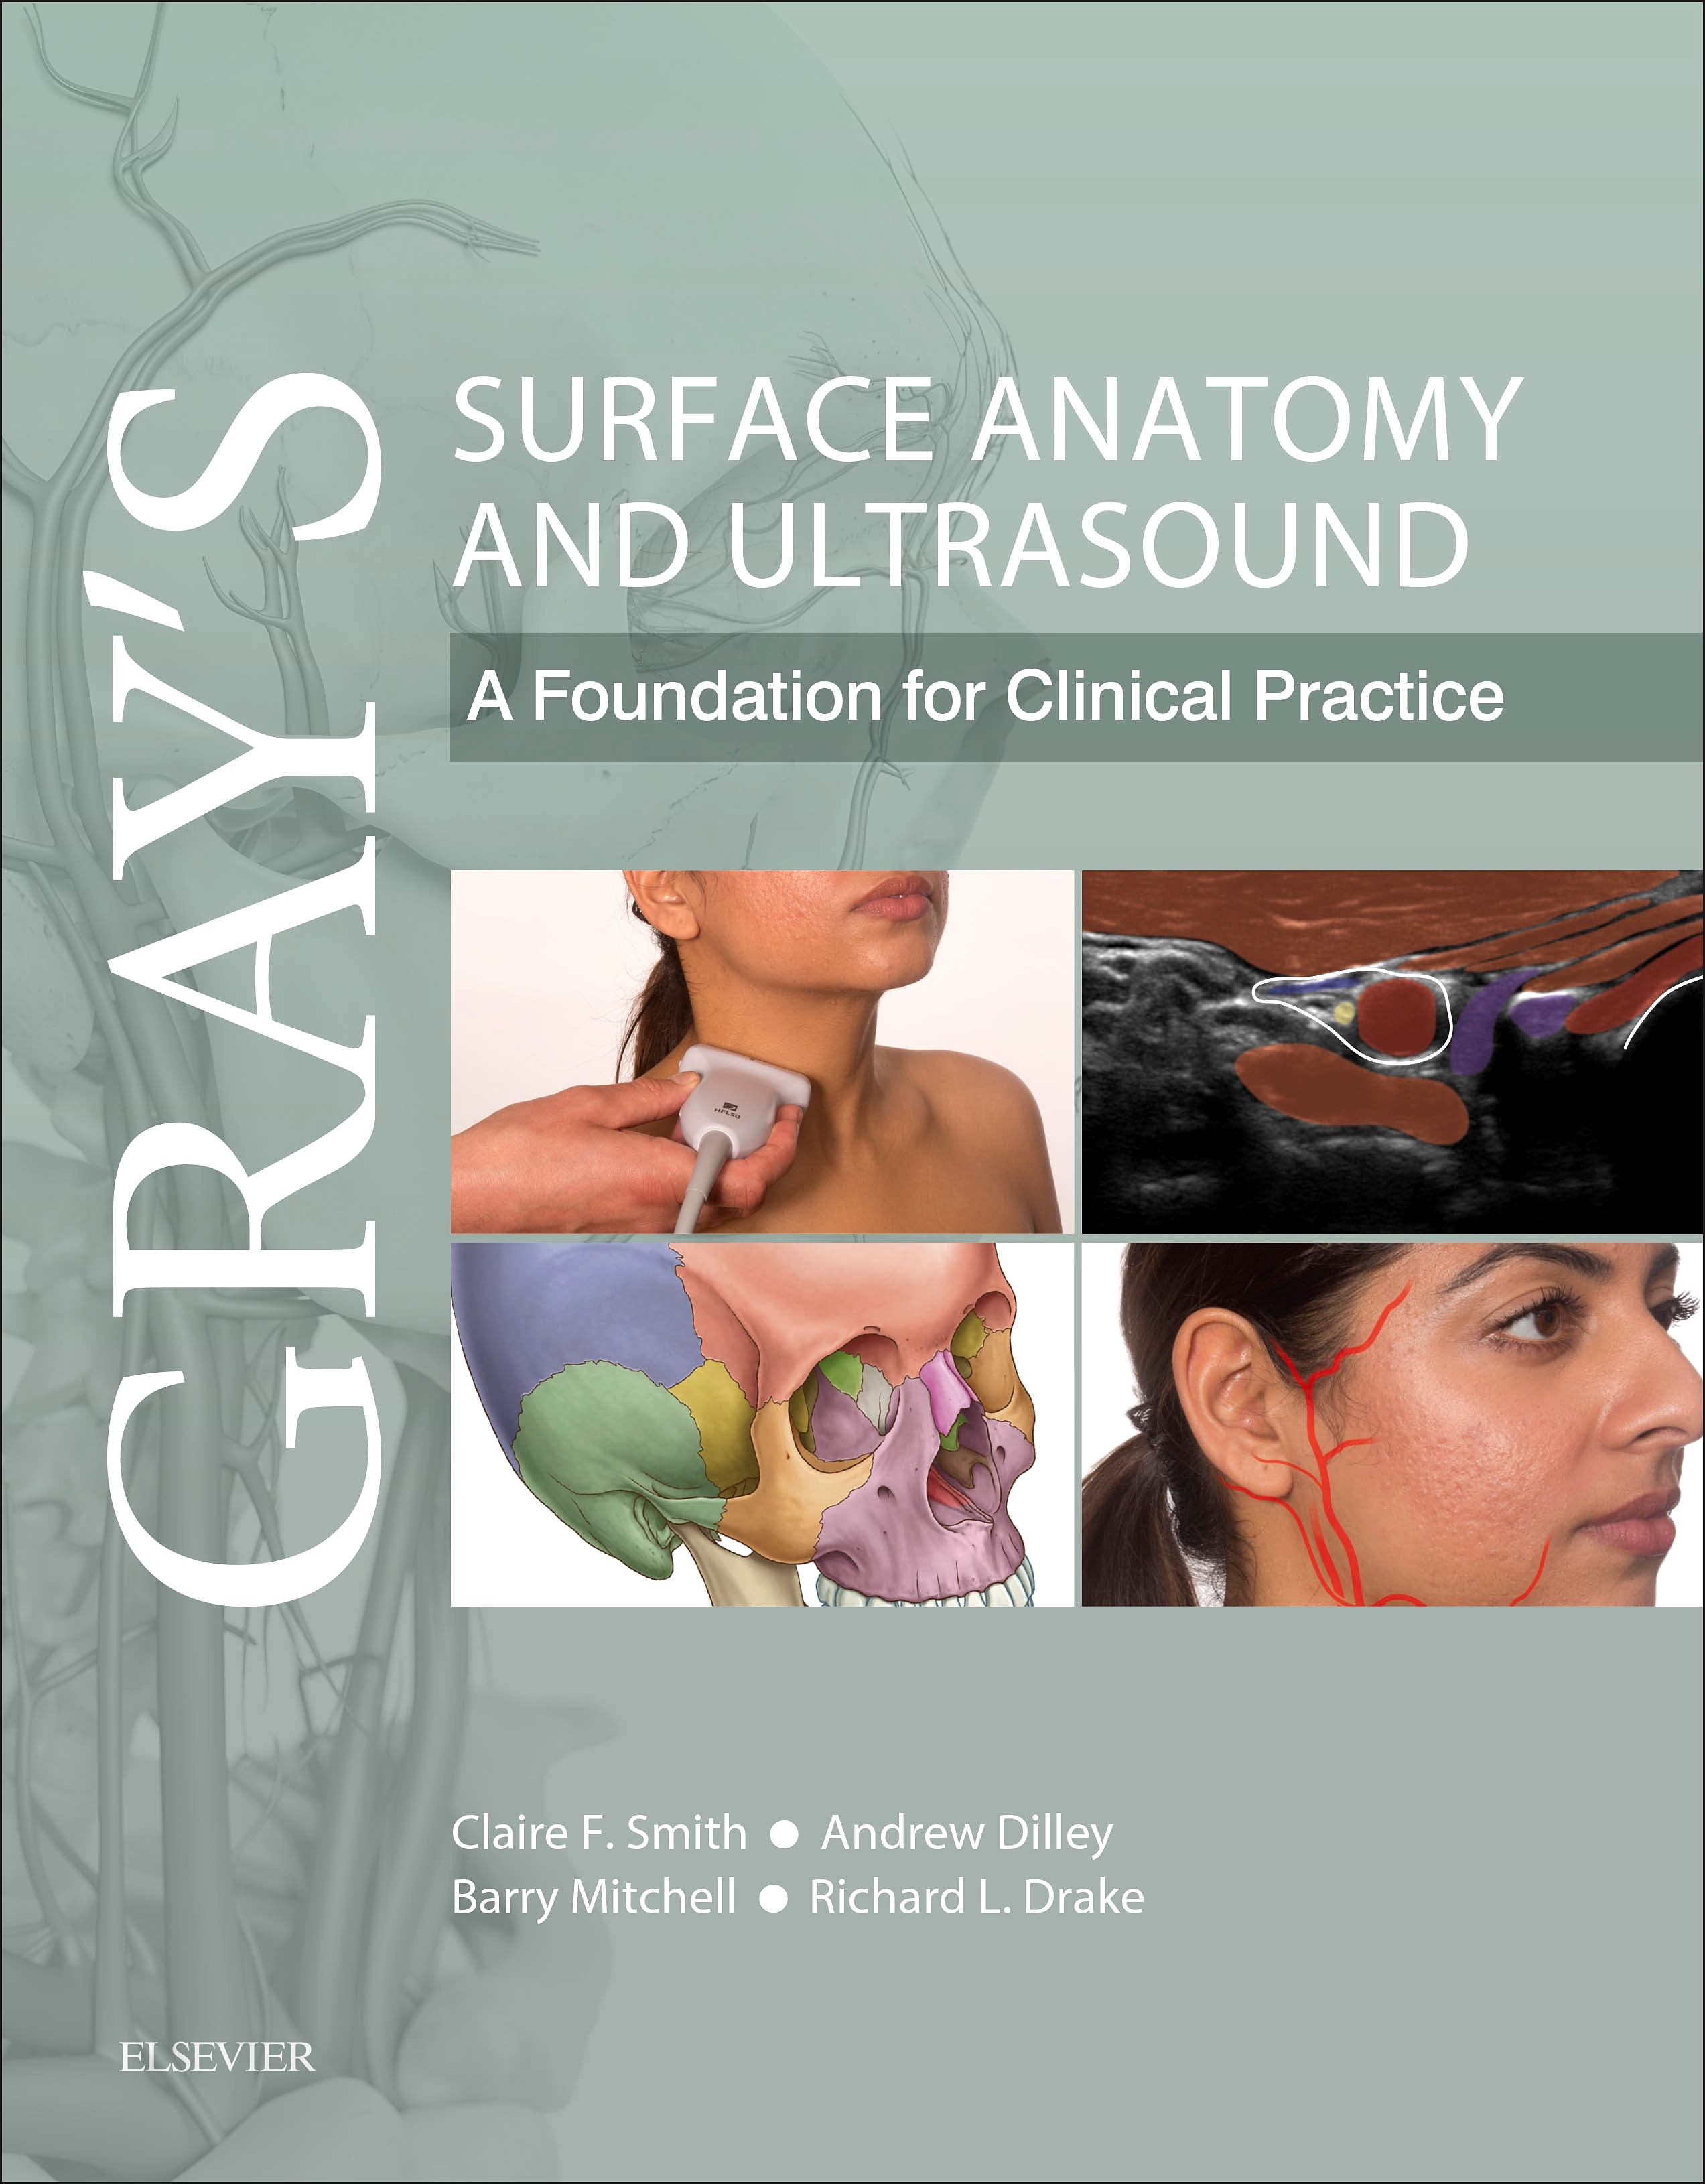 Evolve Resources for Gray's Surface Anatomy and Ultrasound, 1st Edition